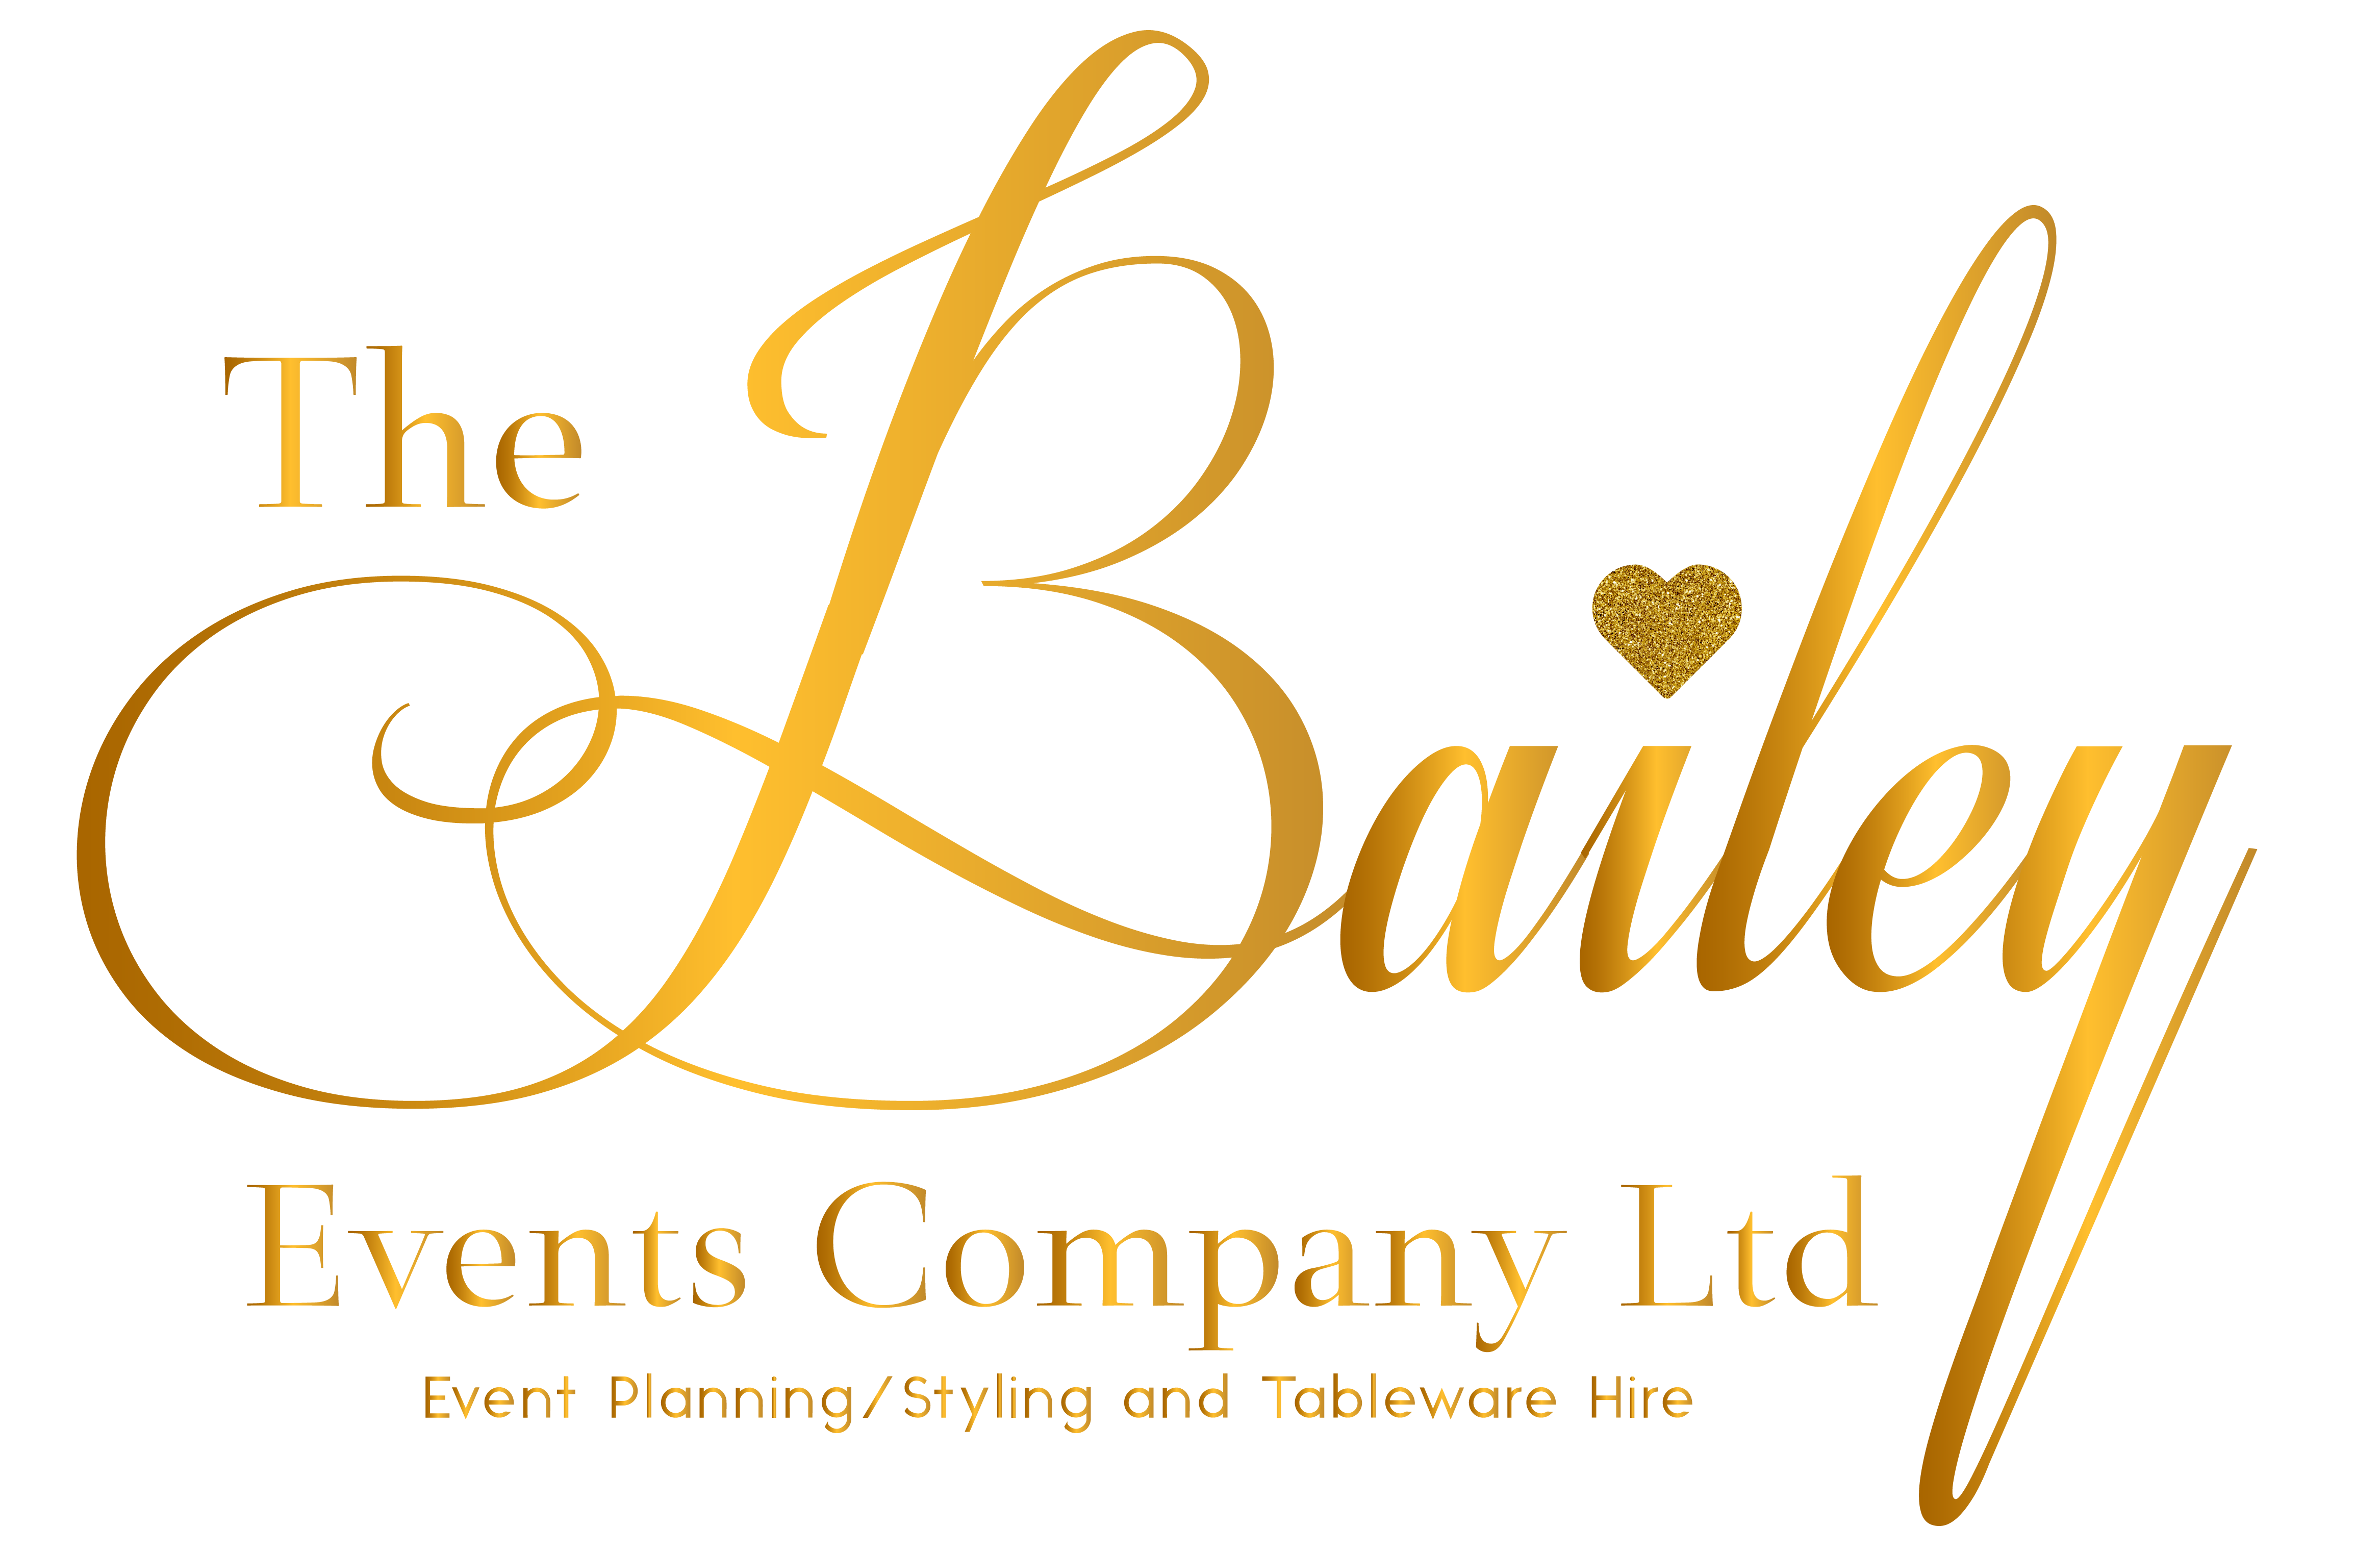 The Bailey Events Company